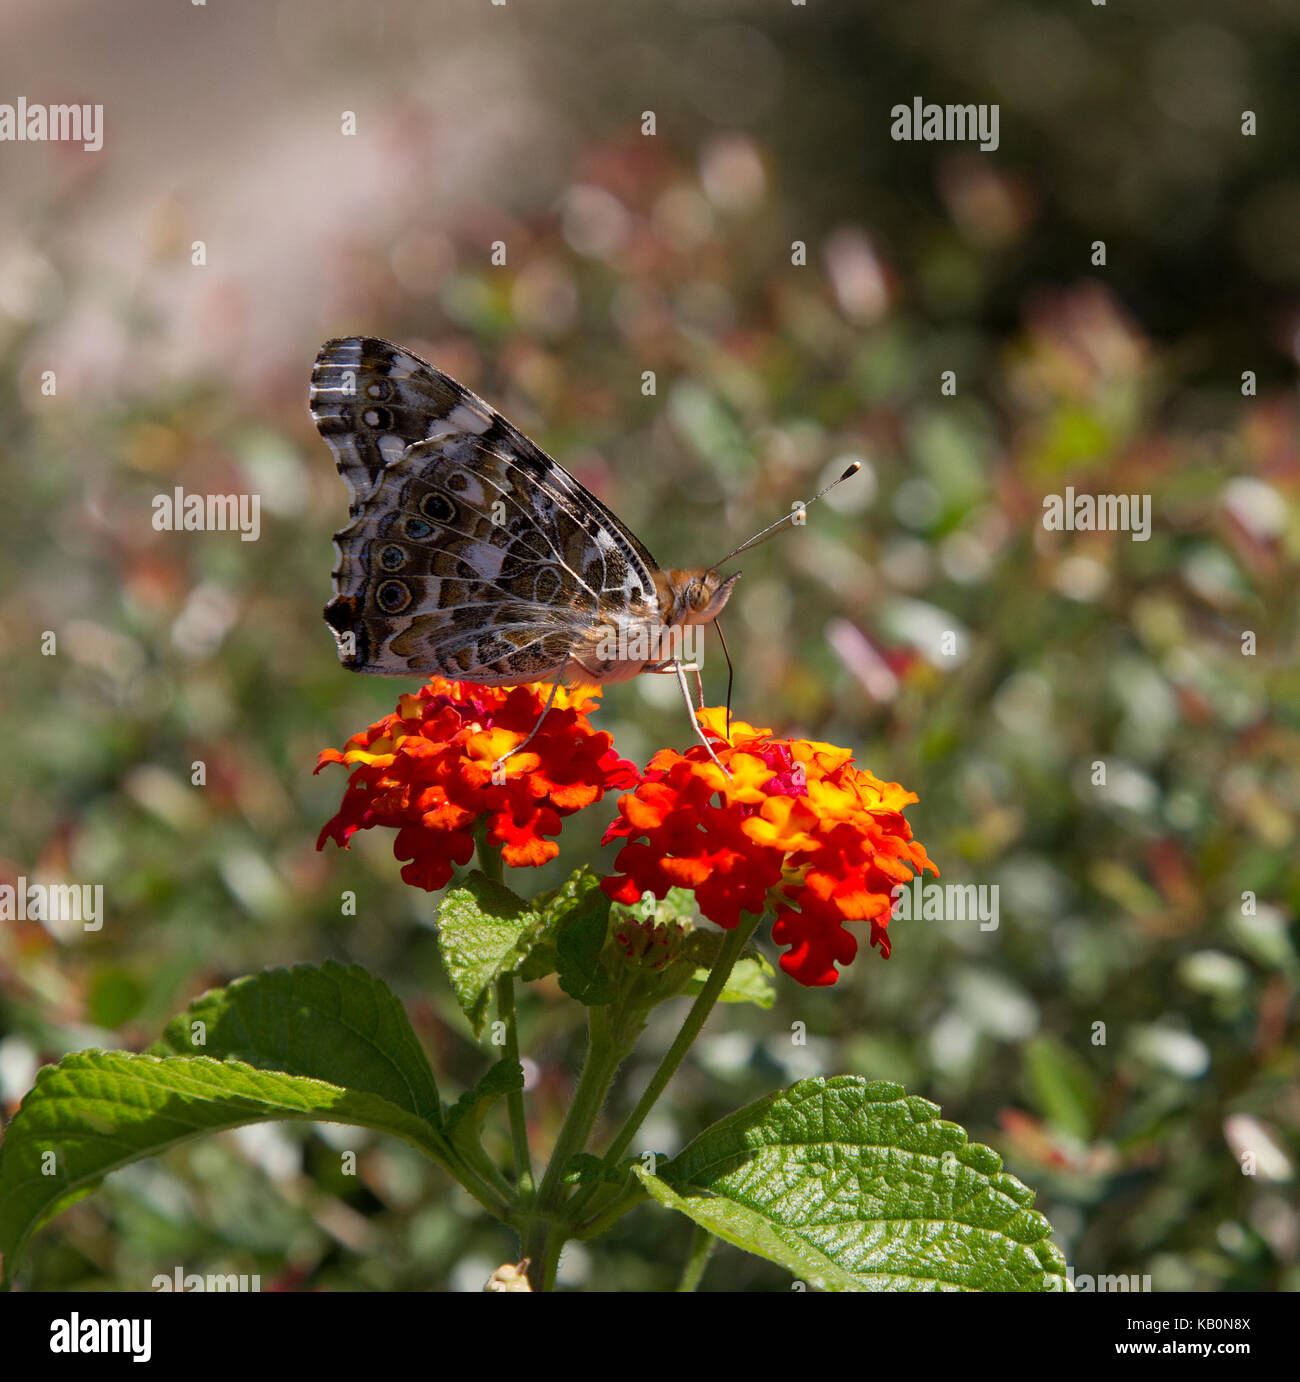 American Lady Butterfly on Red Flower Stock Photo